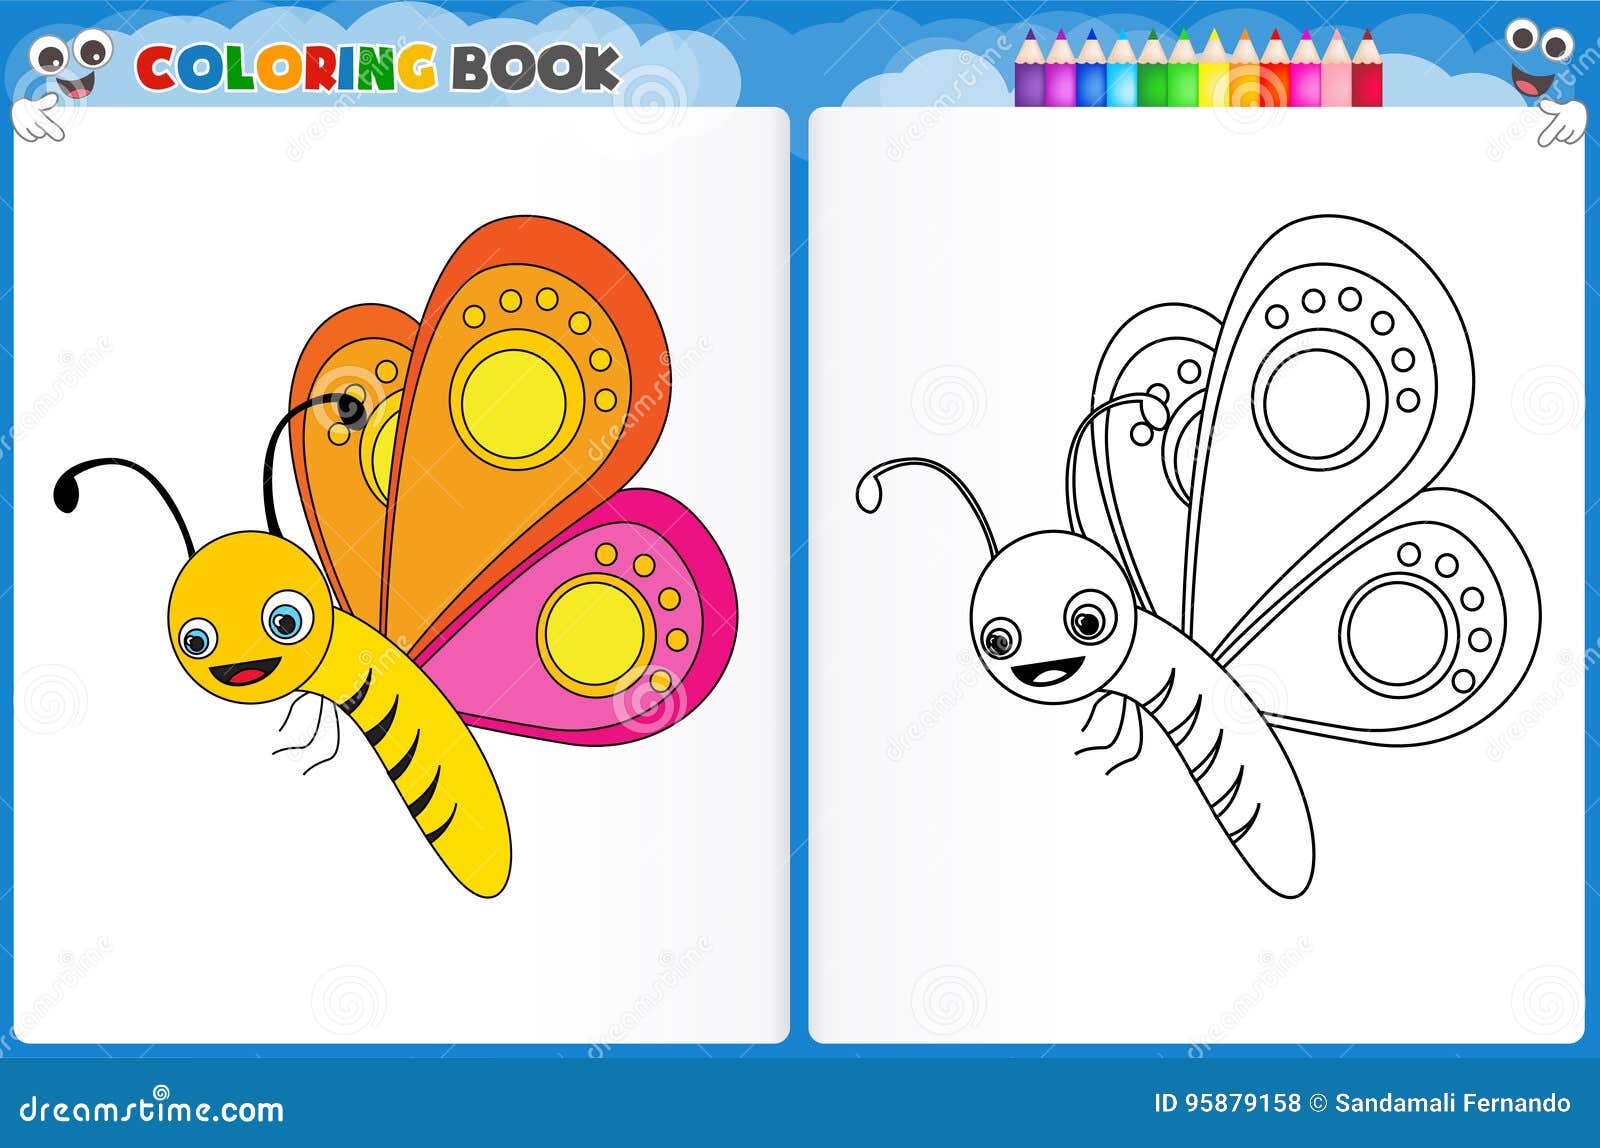 Butterfly coloring page stock illustration. Illustration of homework